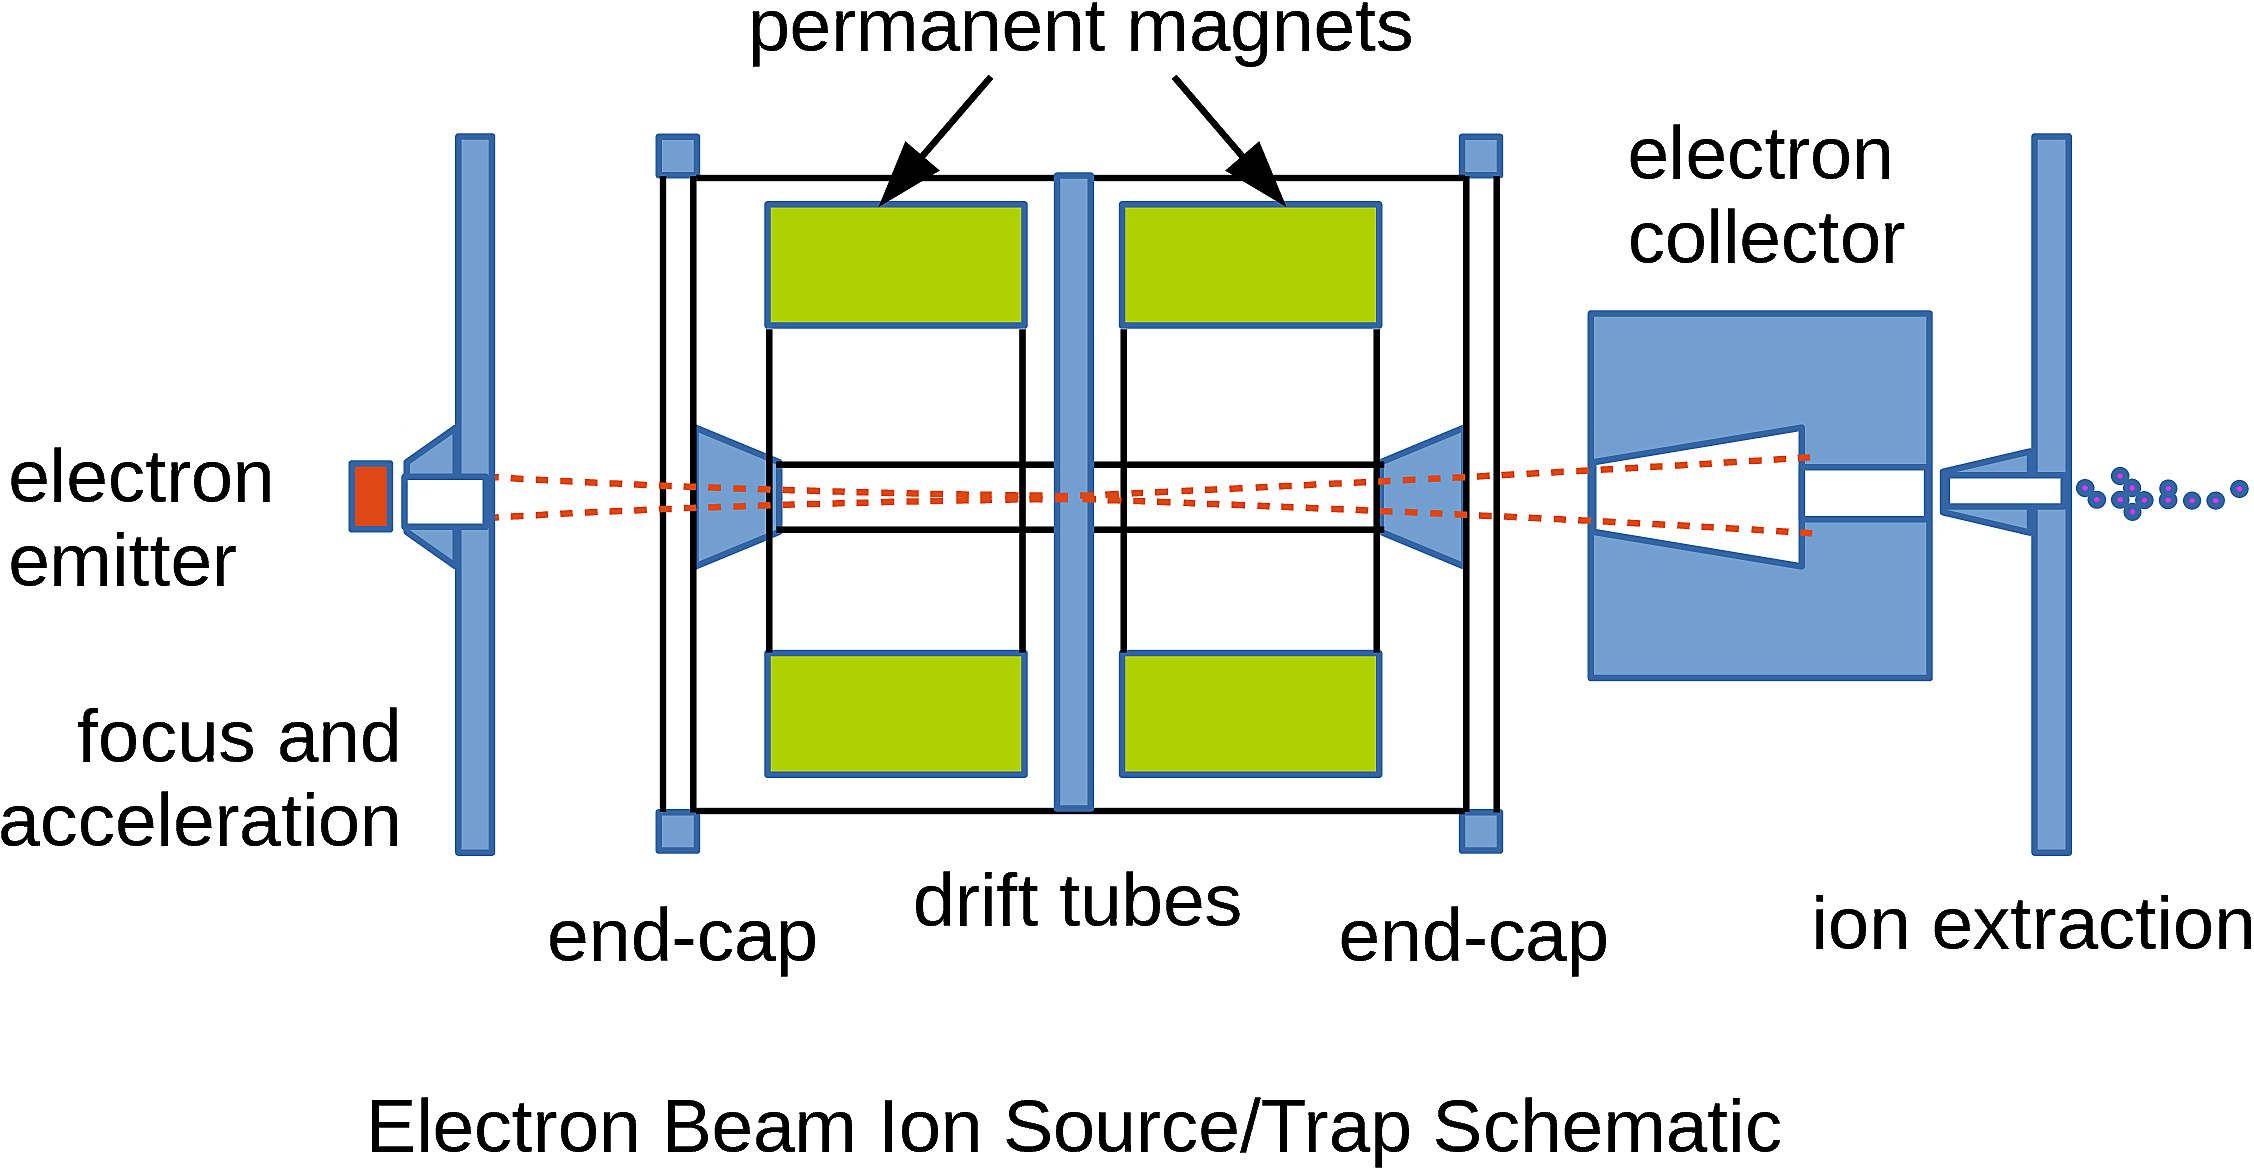 The magnetically confined electron impact ion source/trap